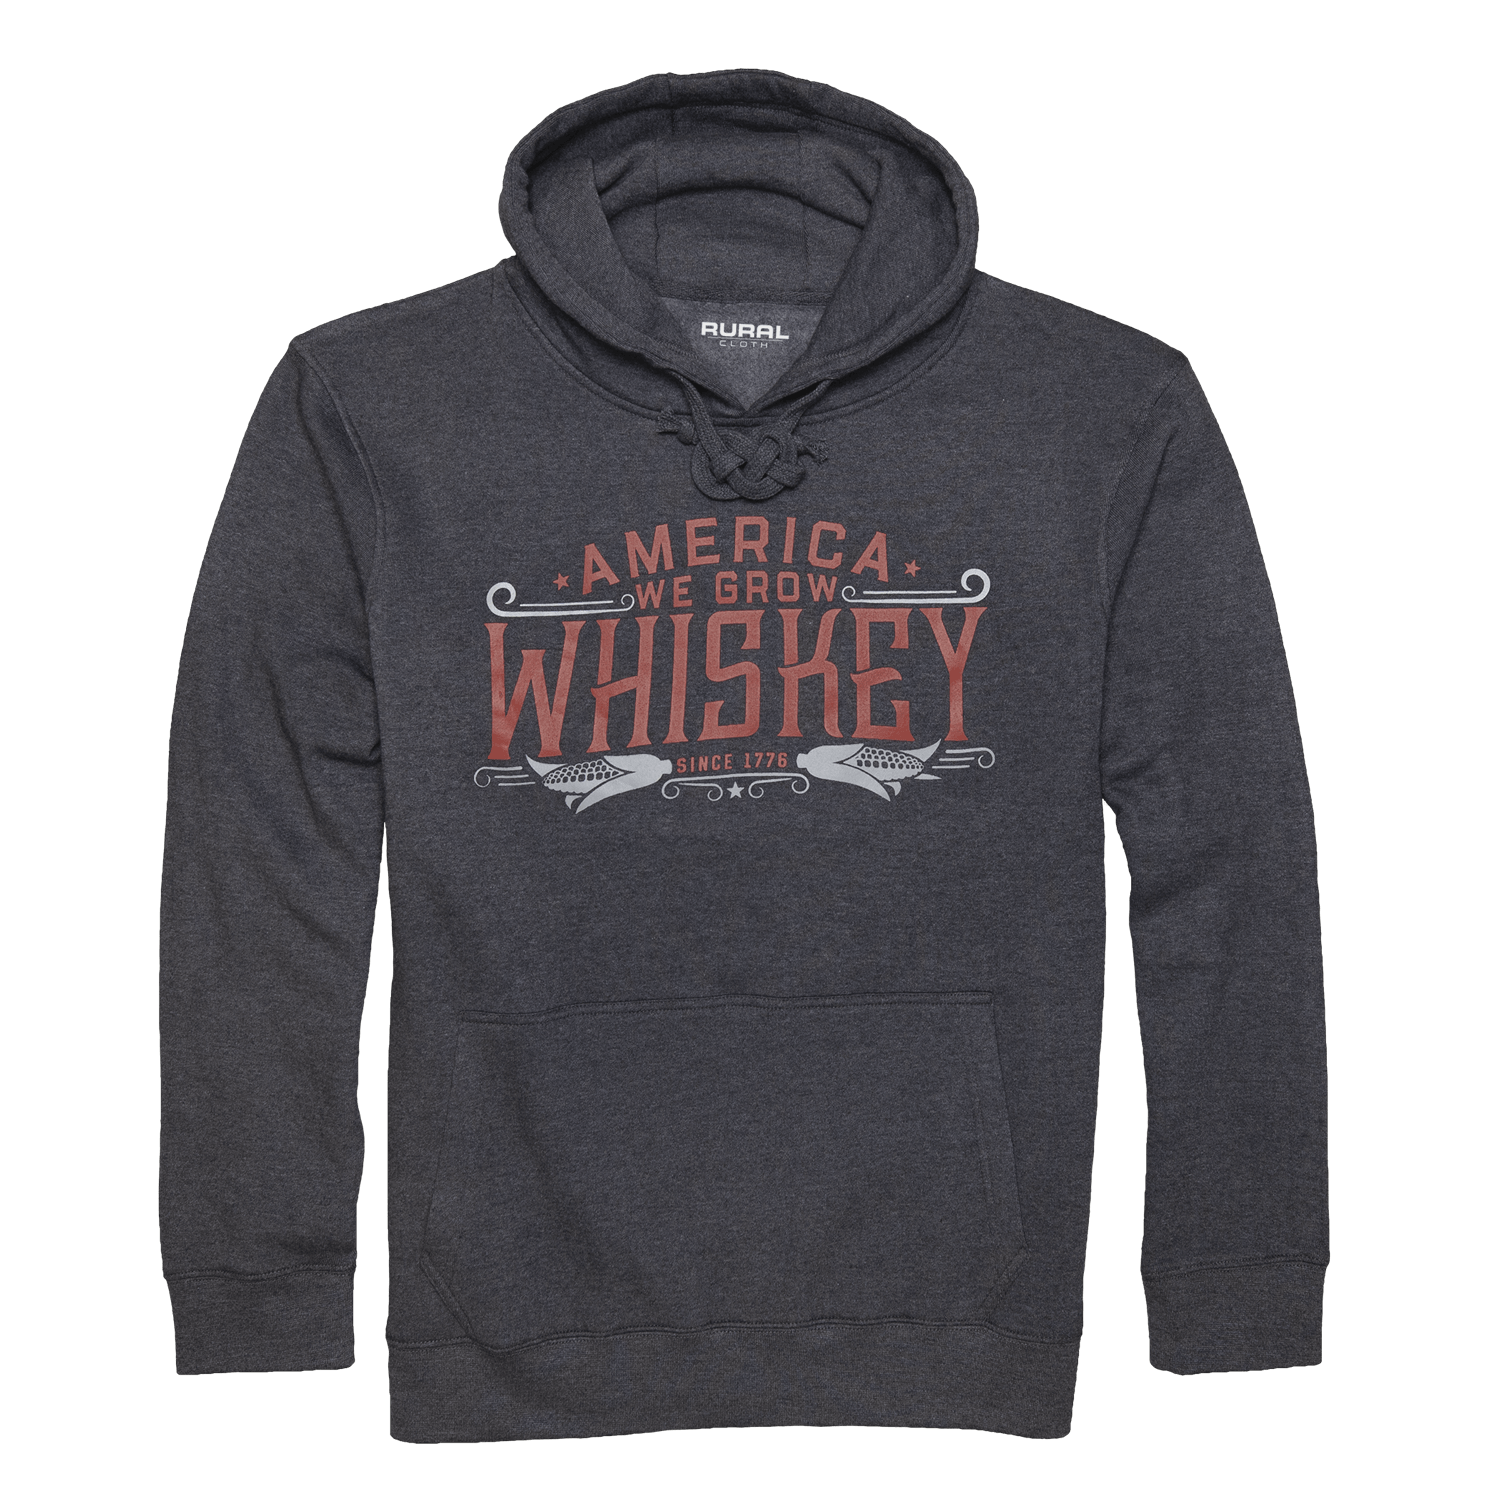 Buy Charcoal Grey Overhead Hoodie from Next USA